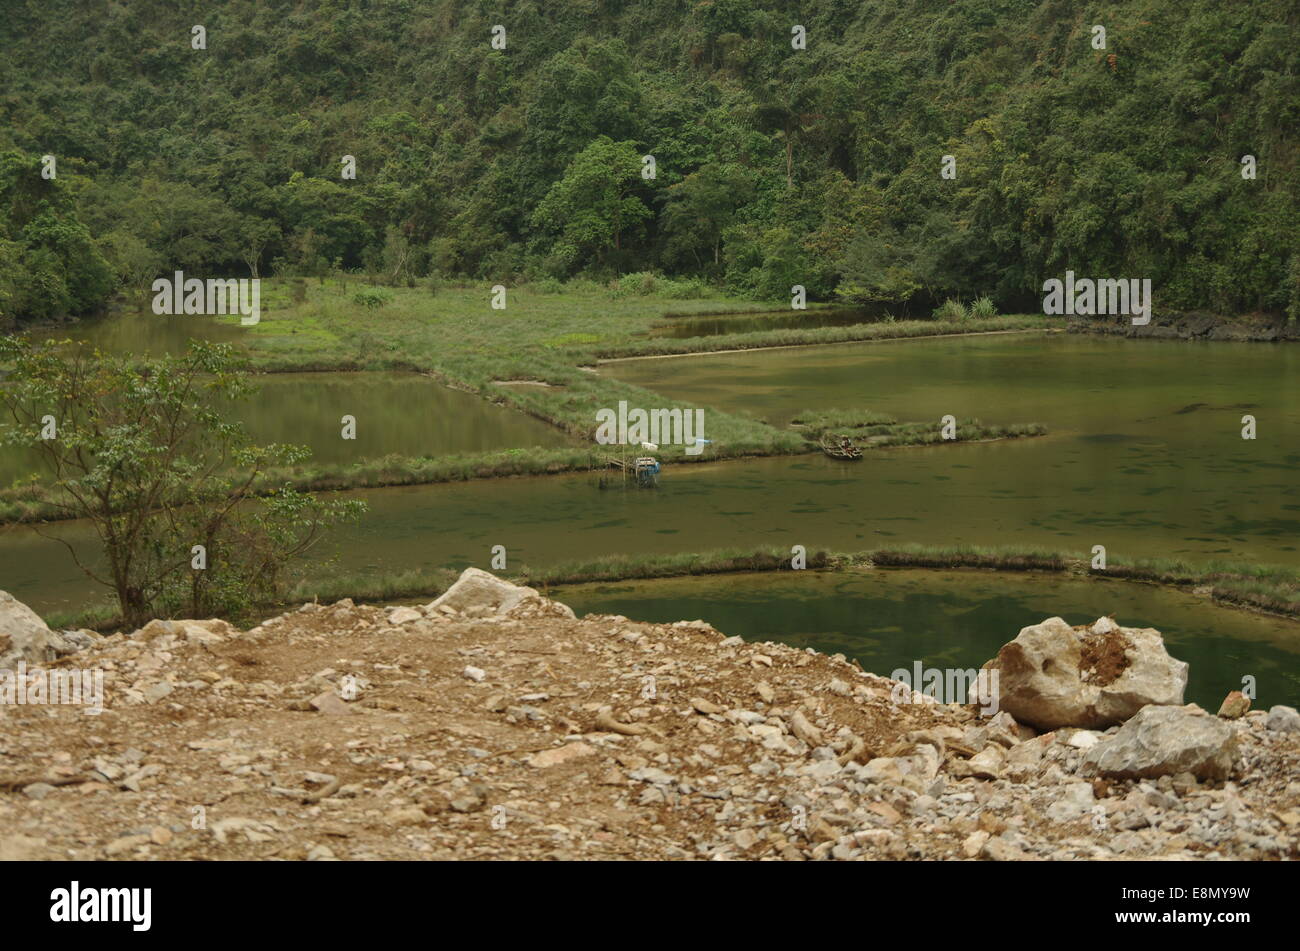 View of a rice field in Cat Ba Stock Photo